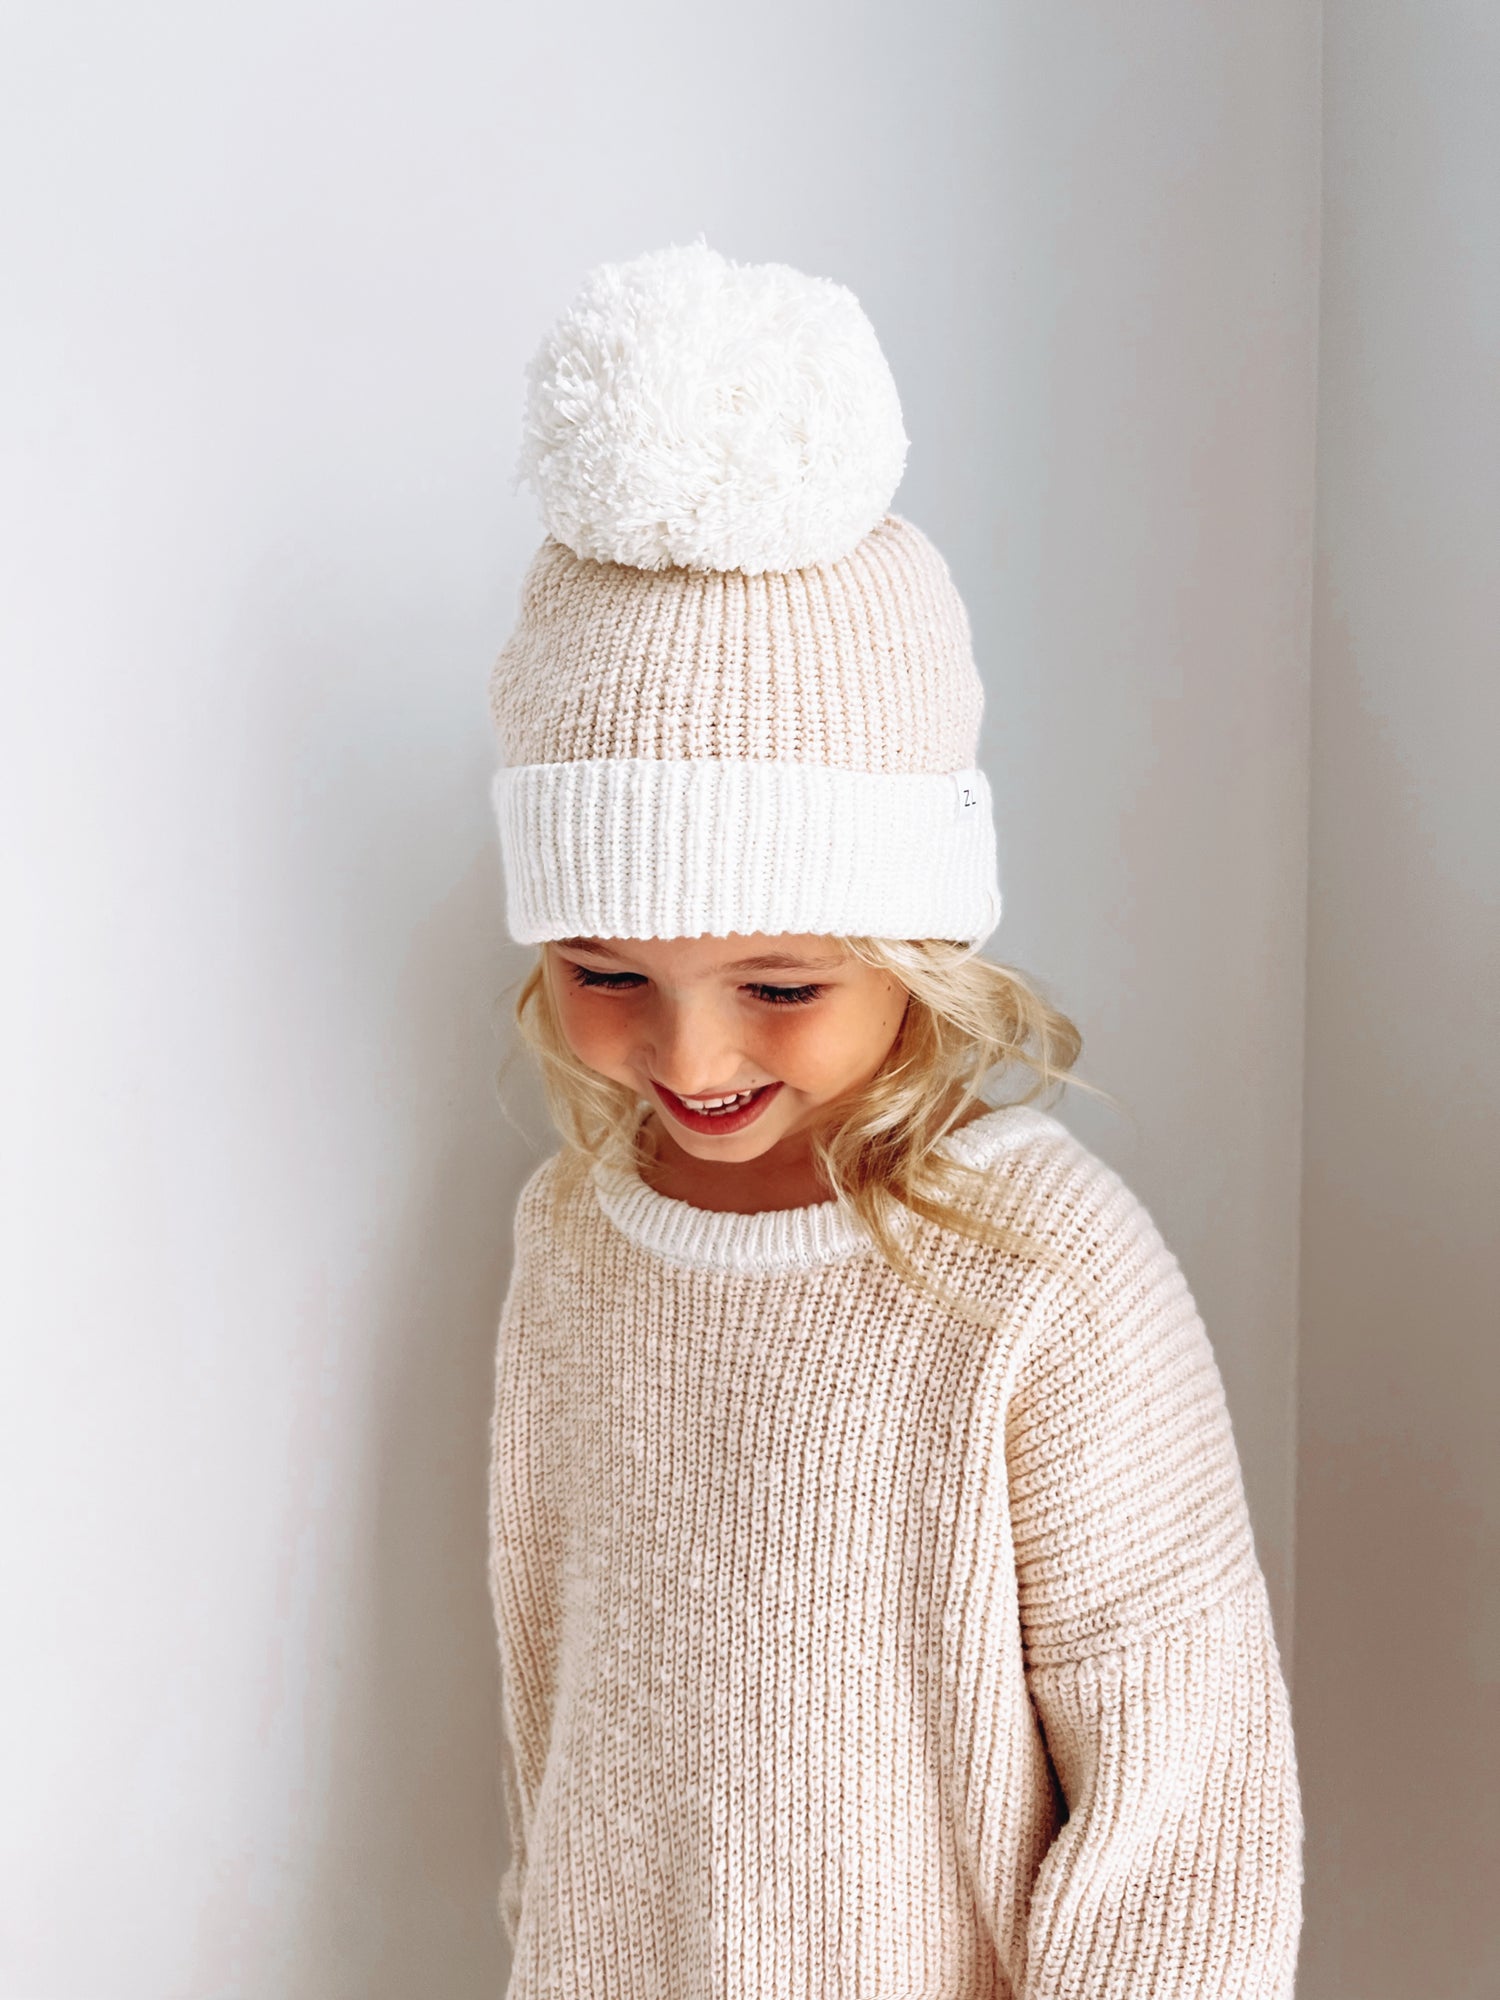 By Ziggy Lou - 100% cotton baby clothing. Featuring two tone petal beanie with pom pom.